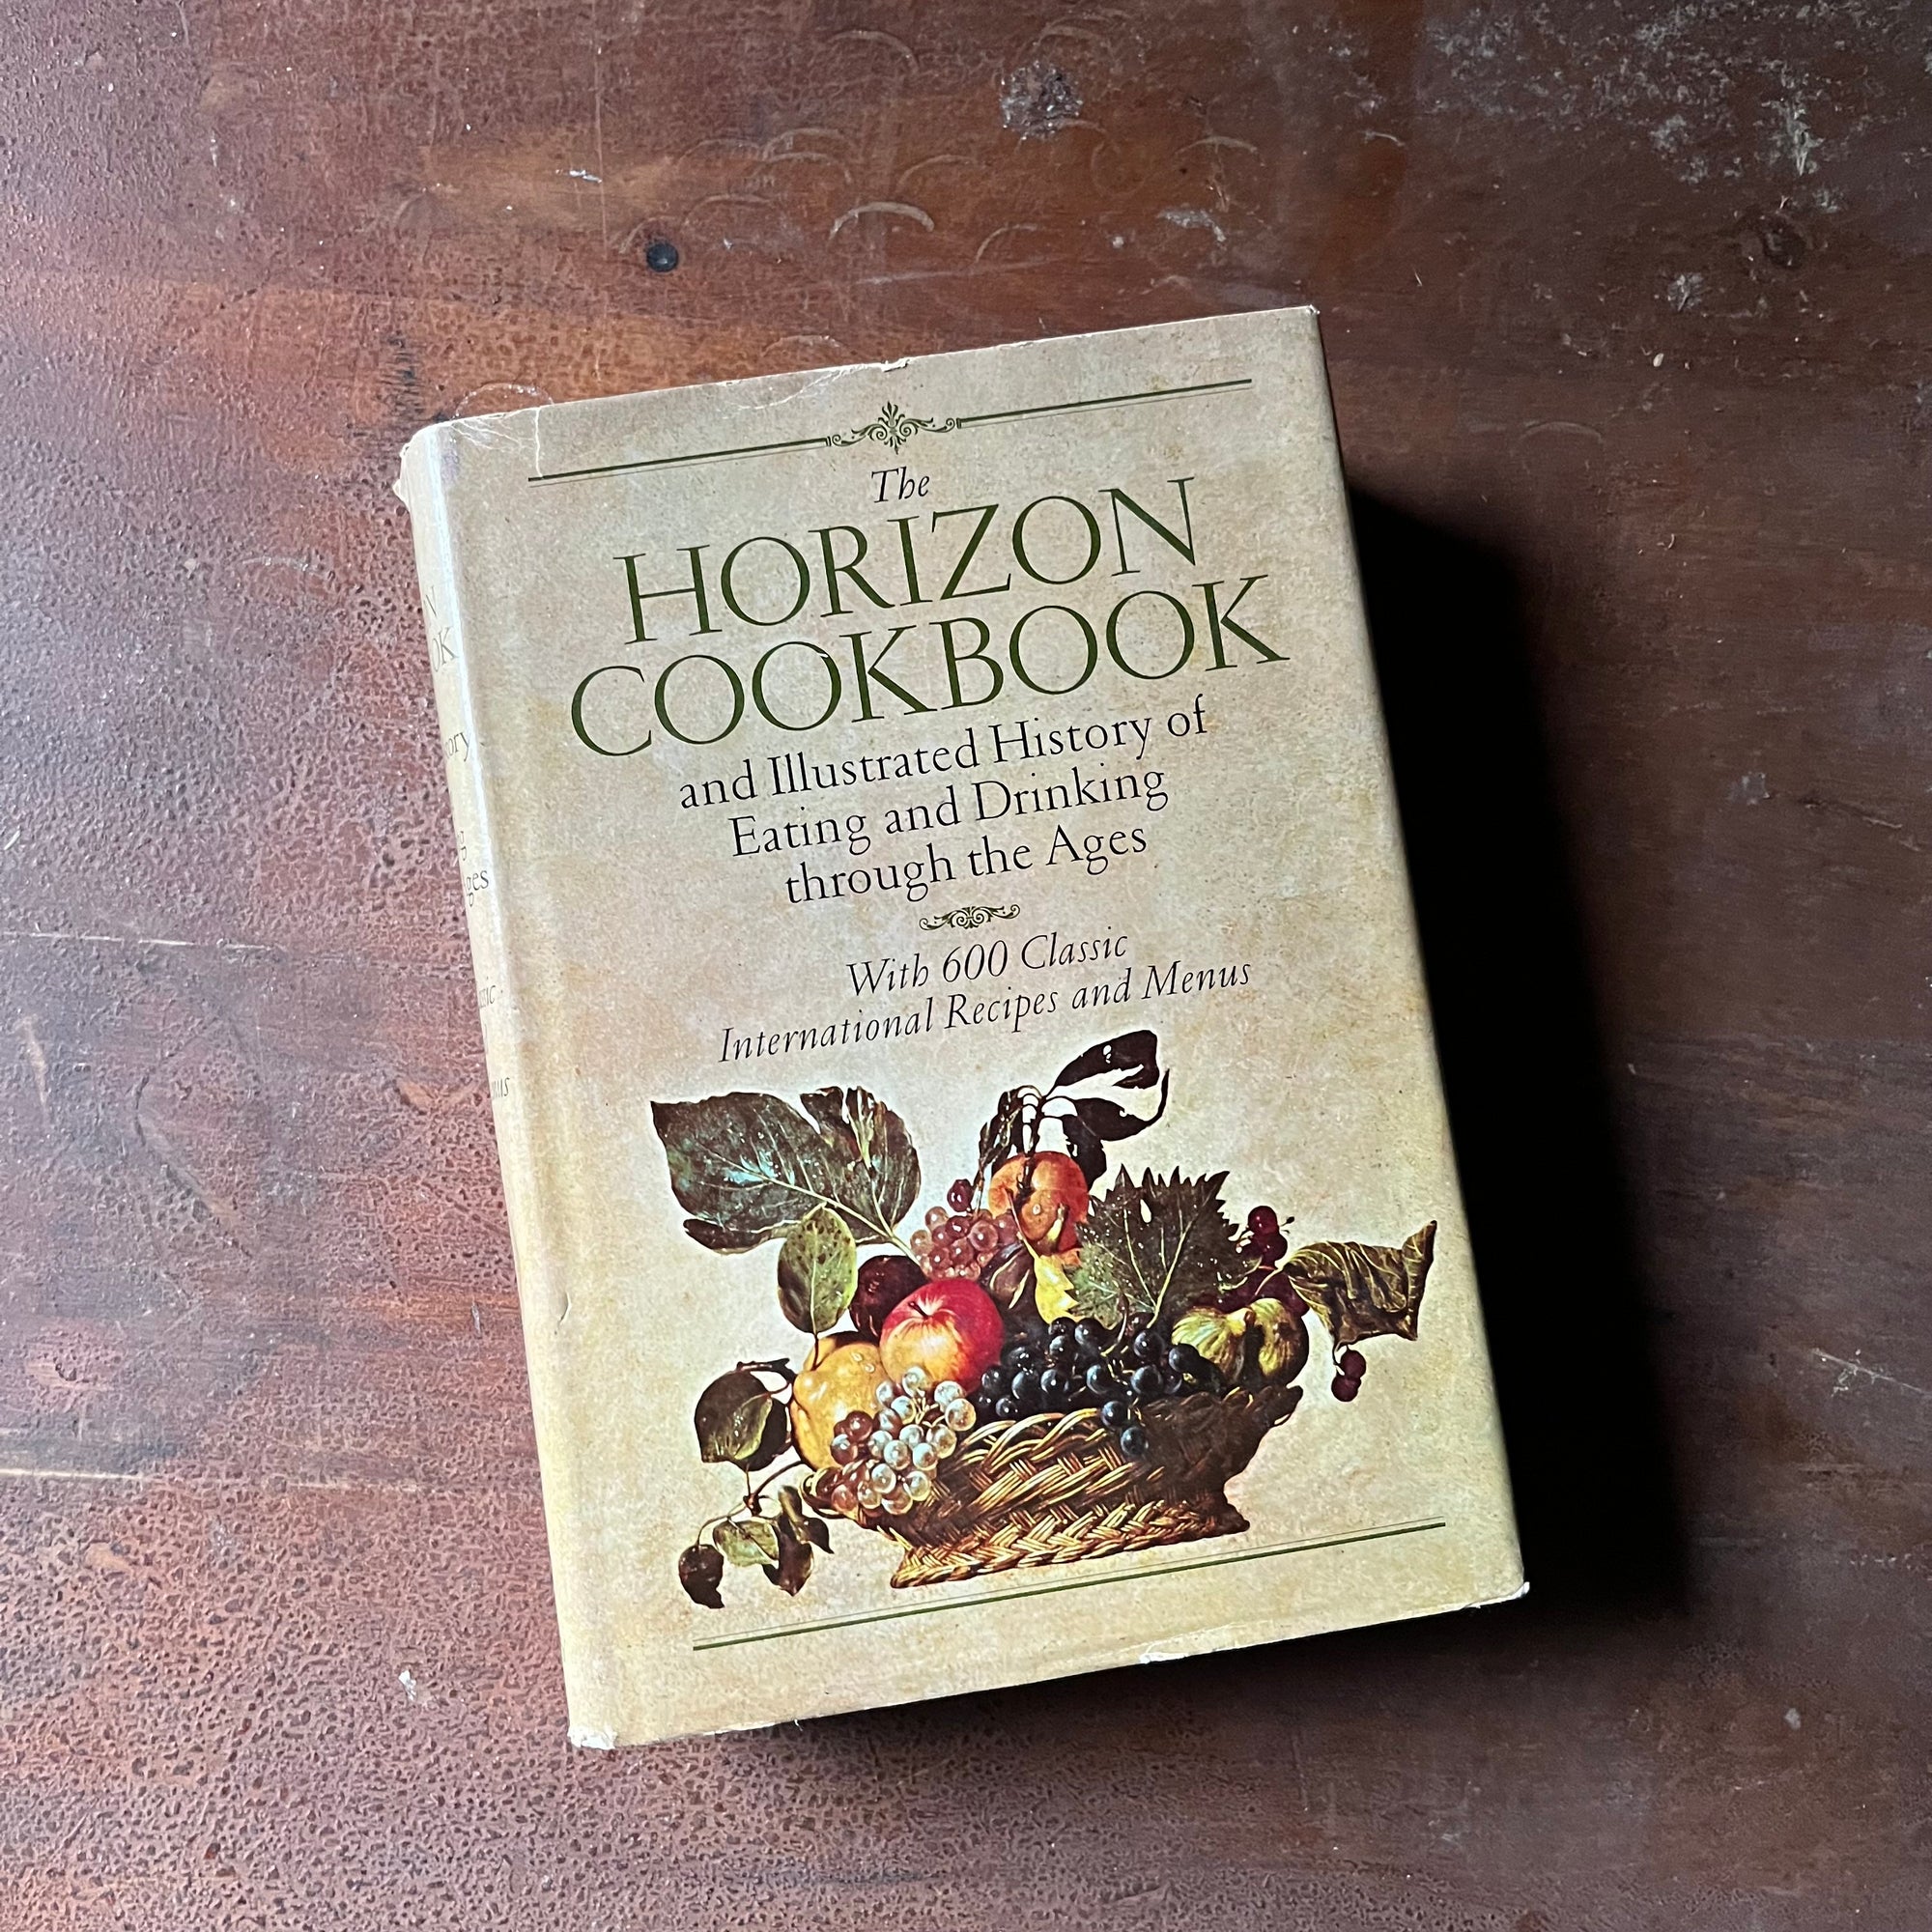 The Horizon Cookbook by William Harlan Hale - 1960 Edition - view of the dust jacket's front cover